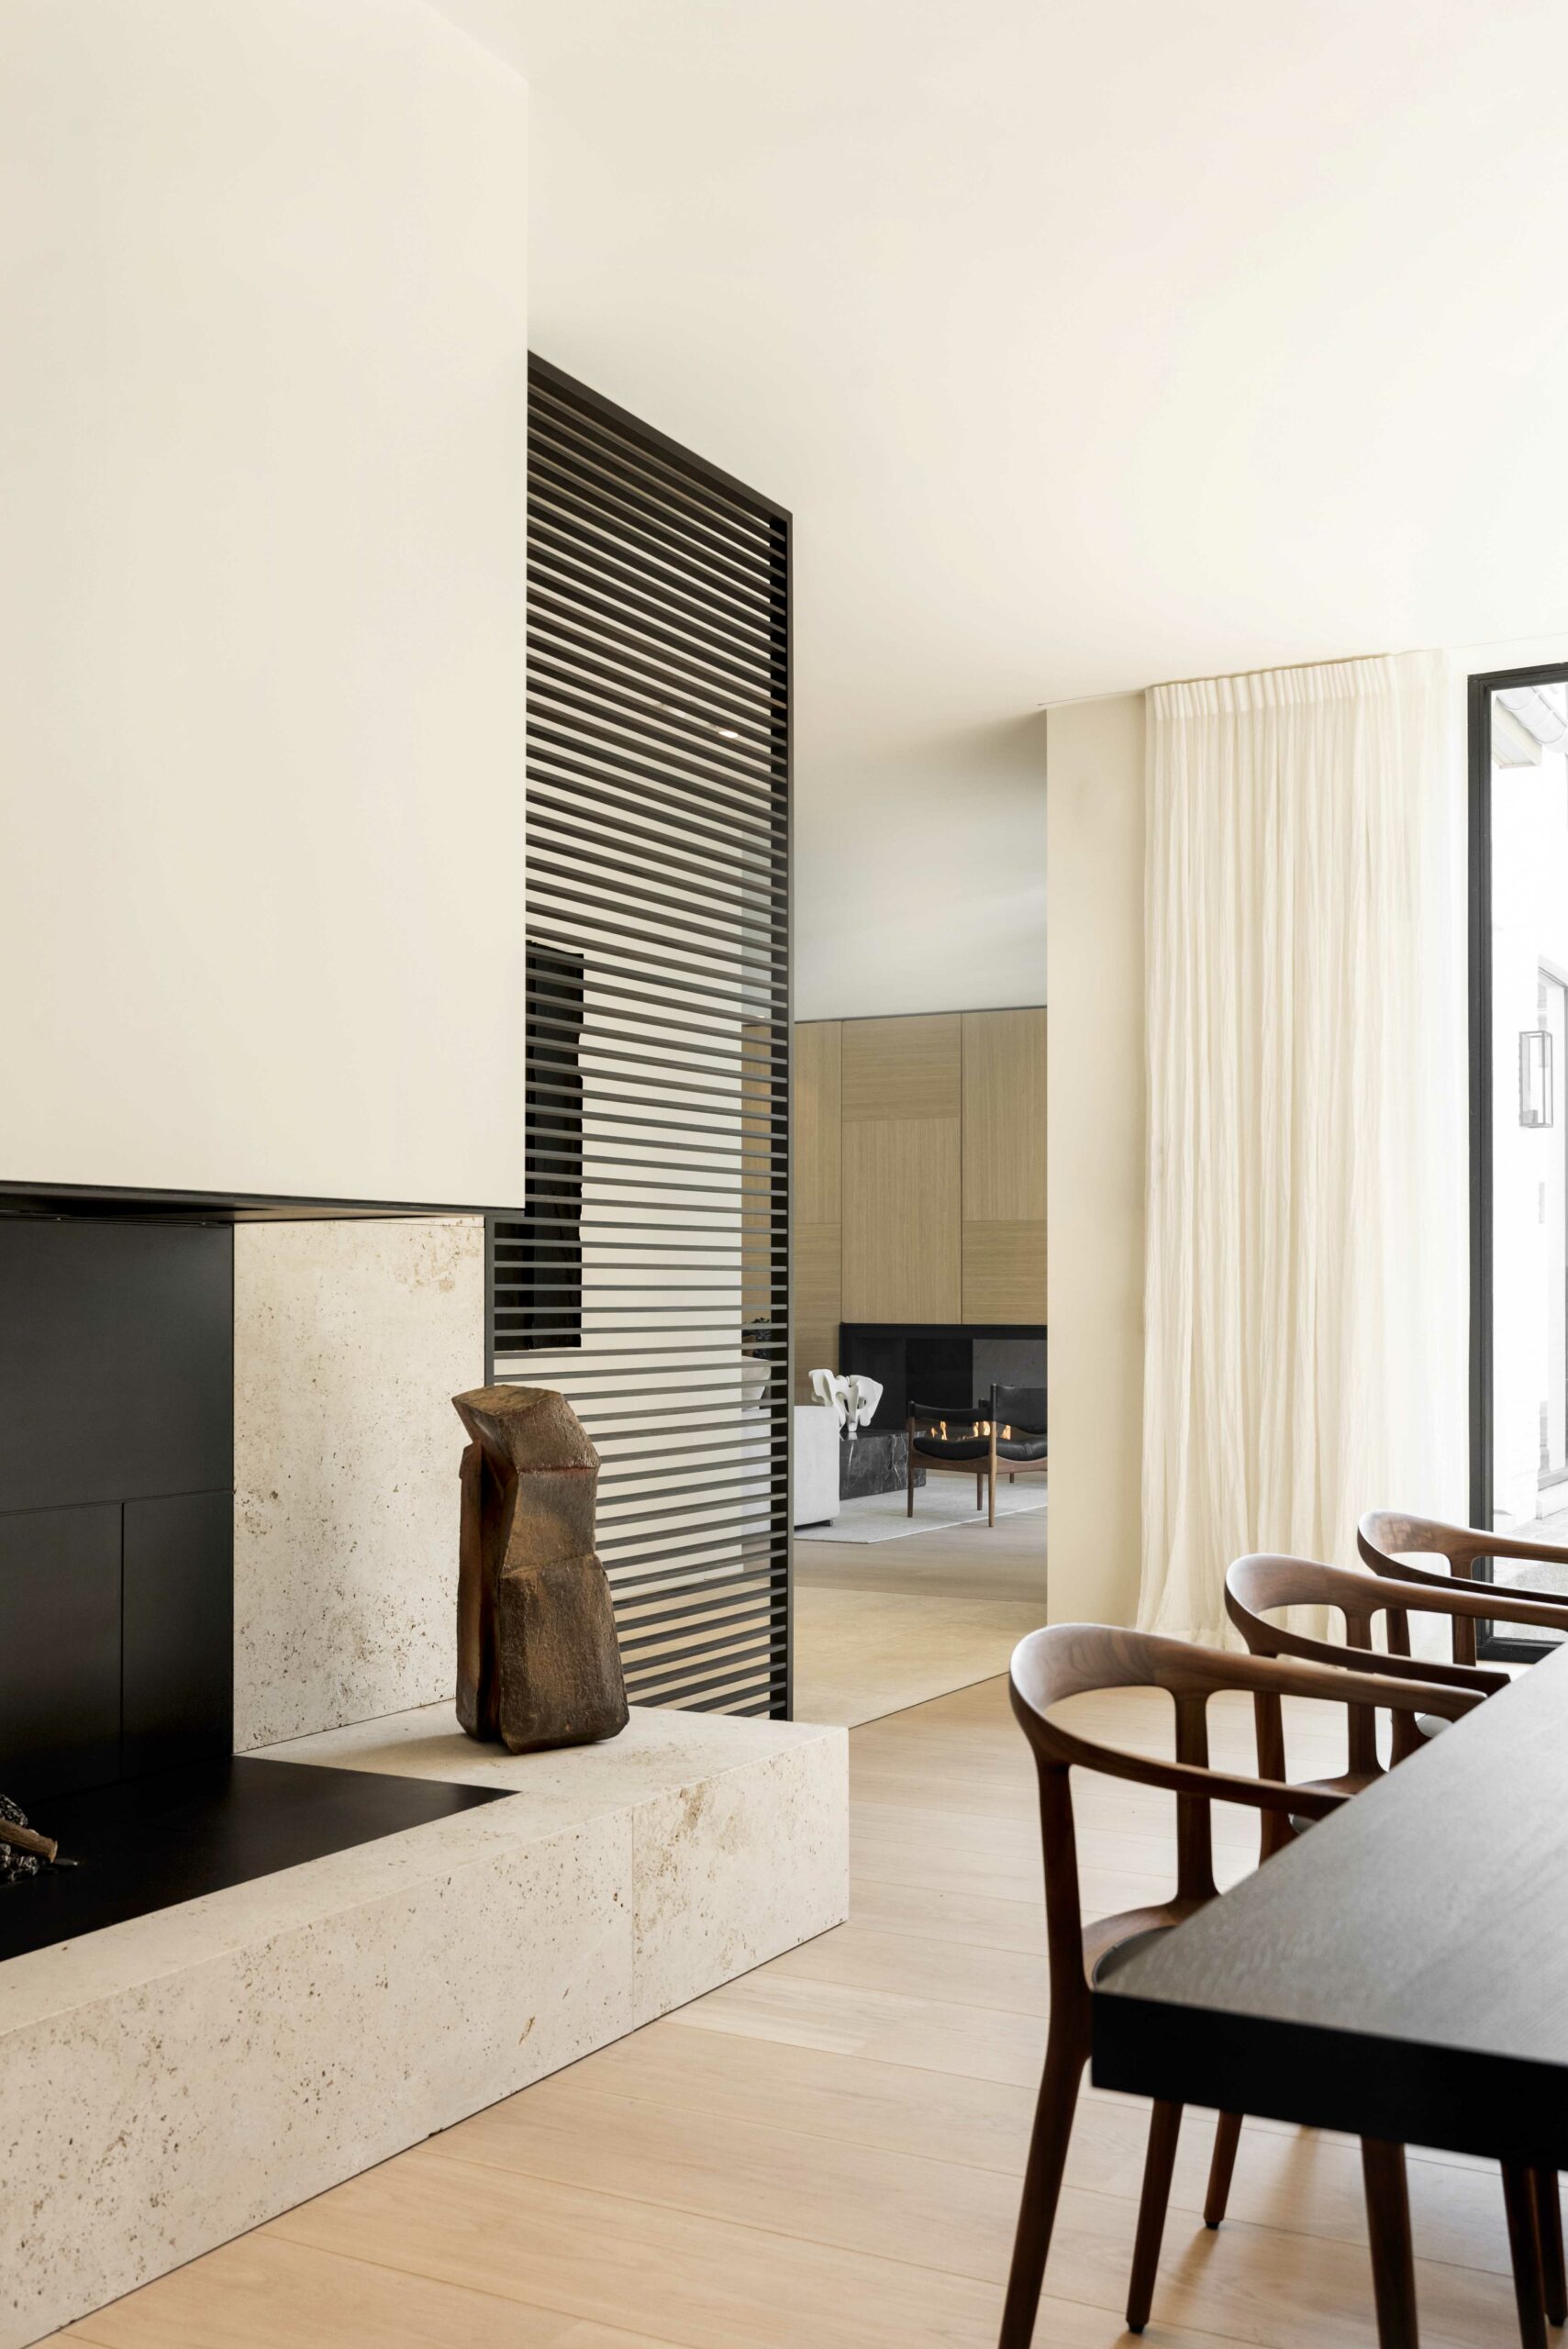 A sleek living space with a striped partition, rustic sculpture, and fireplace. Modern design meets warmth with wooden elements and sheer curtains.